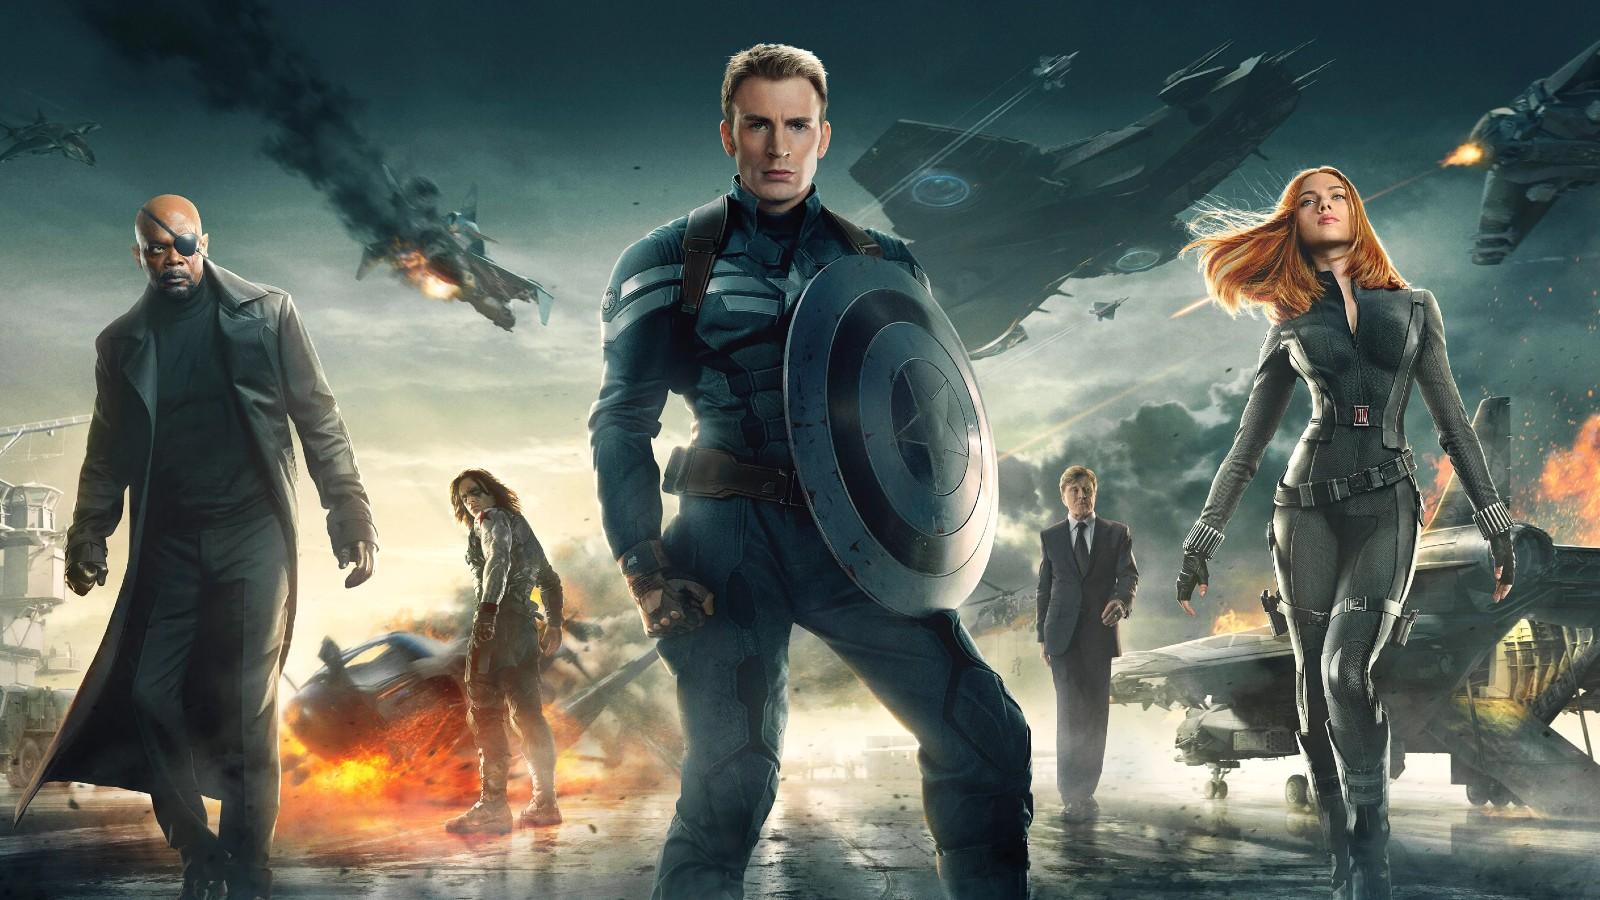 Captain America flanked by Nick Fury and Black Widow in Captain America: The Winter Soldier.